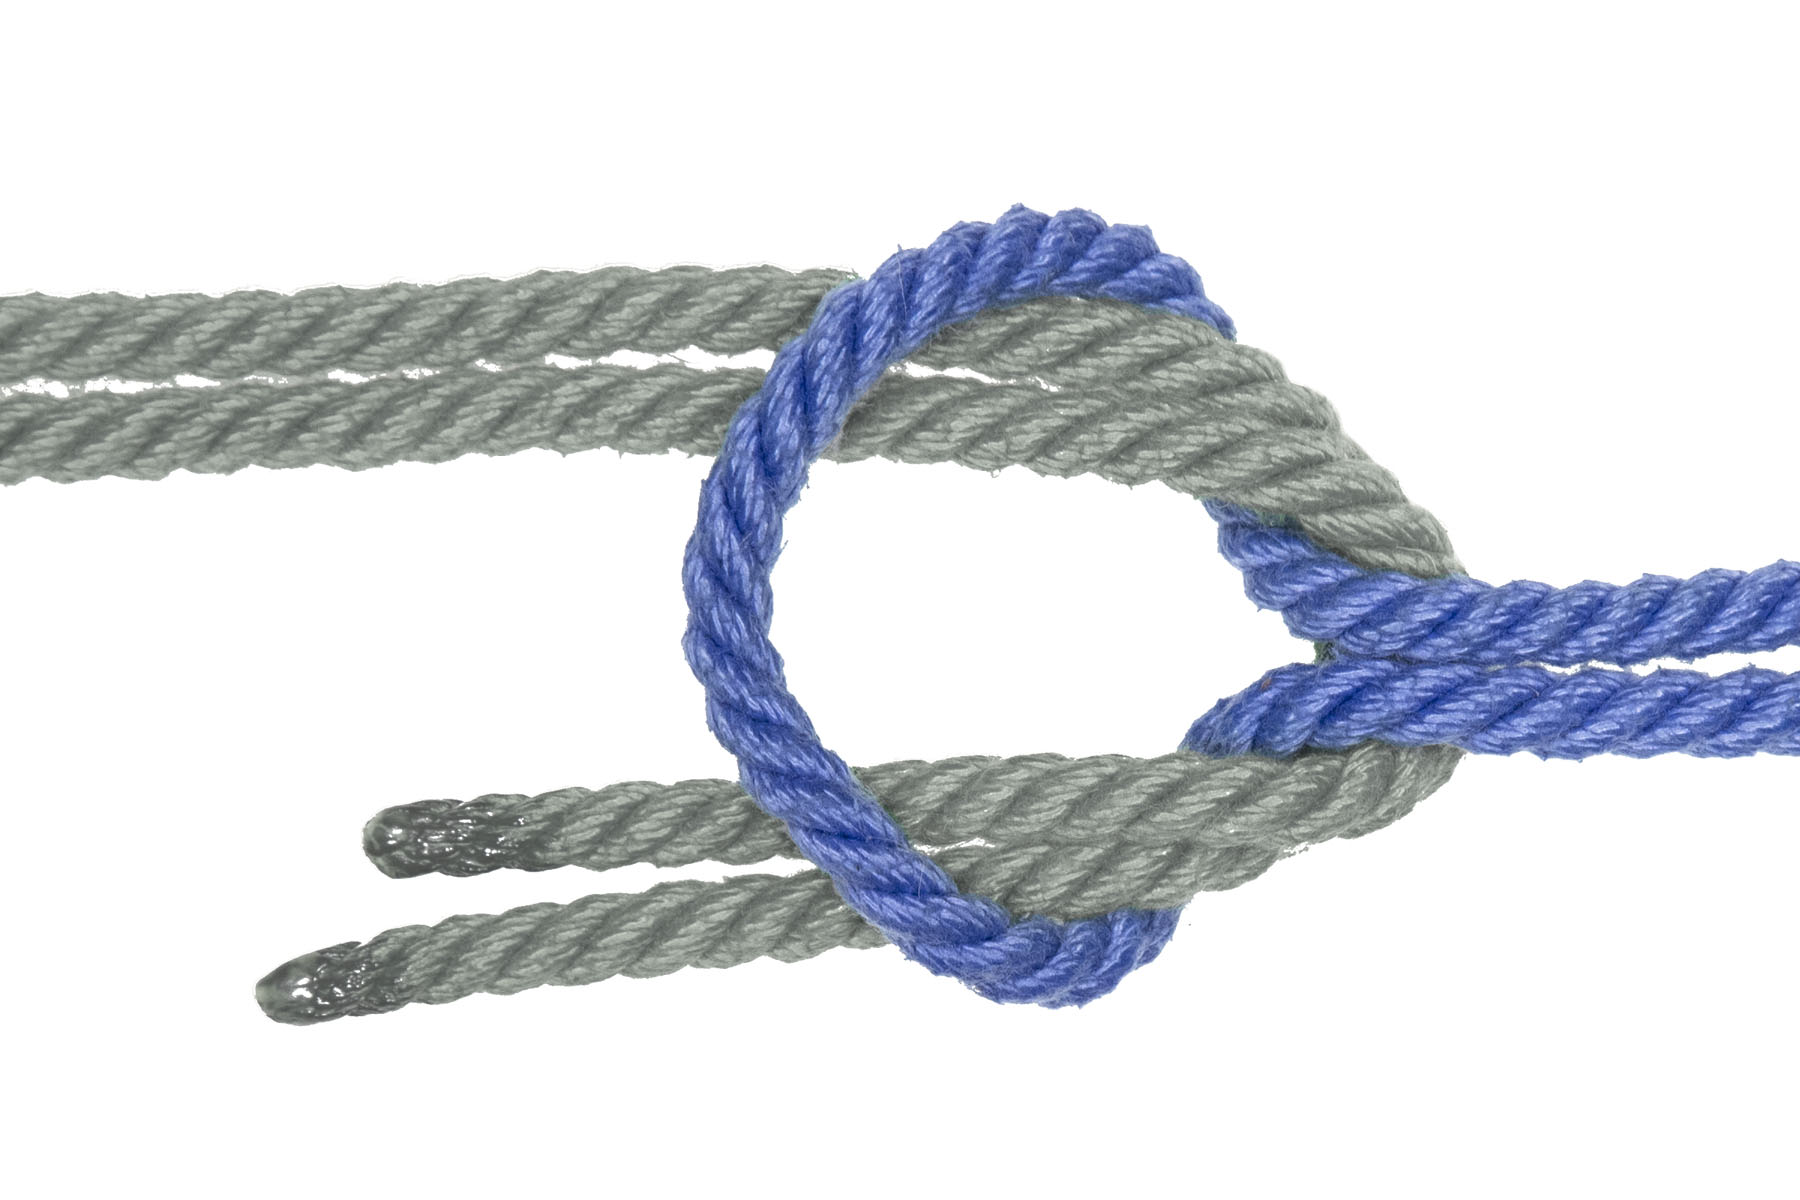 The bight of the blue rope has been flipped over, so the blue rope no longer crosses over itself, instead simply forming a large, spread-out bight. The green rope goes under the edge of the loop on the right, over the edge of the loop on the left, crosses under both parts of the blue rope, over the blue rope on the left, and finally under the blue rope on the right. The green rope now makes a U shape, without crossing over itself.